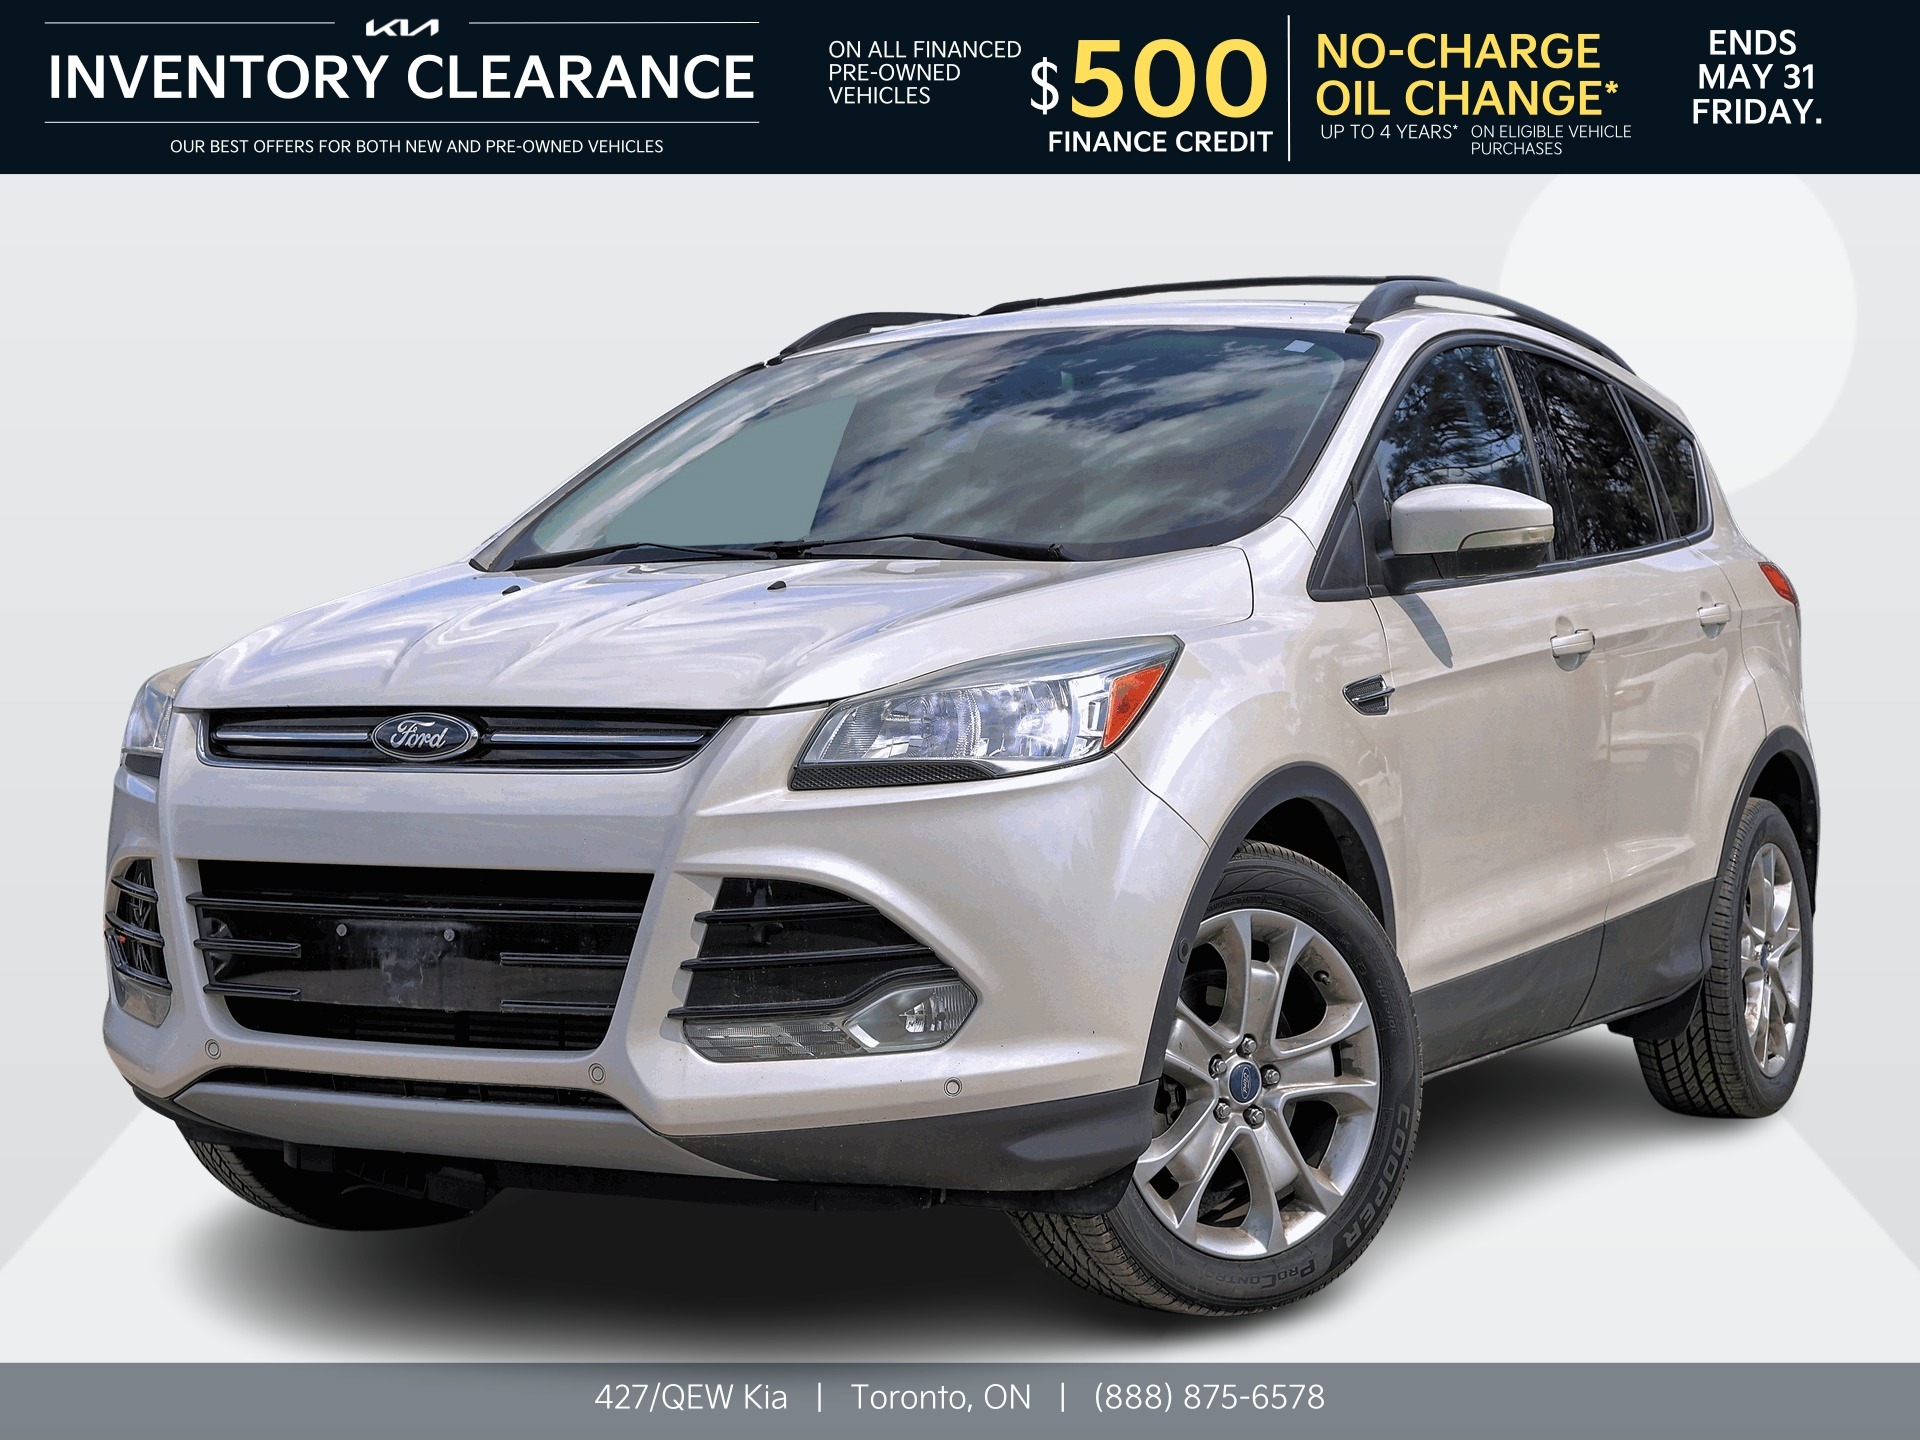 2013 Ford Escape SEL | Power Liftgate | Heated Seat | Cruise